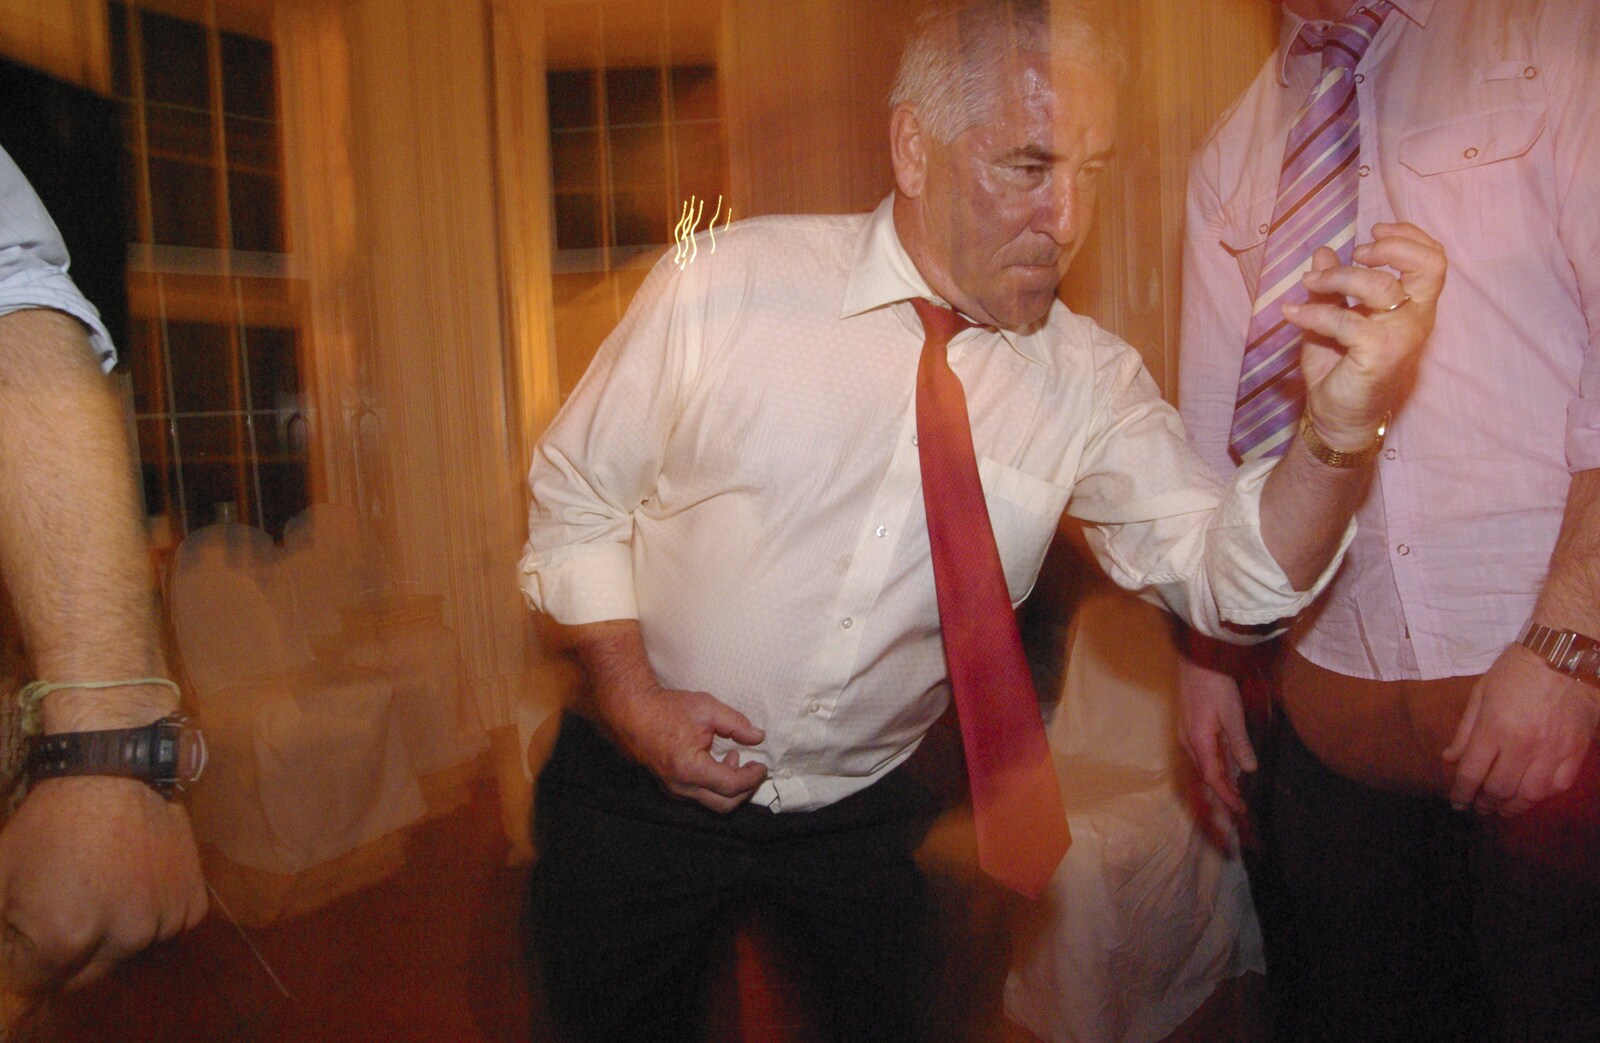 A bit of air guitar from Julie and Cameron's Wedding, Ballintaggart House, Dingle - 24th July 2009